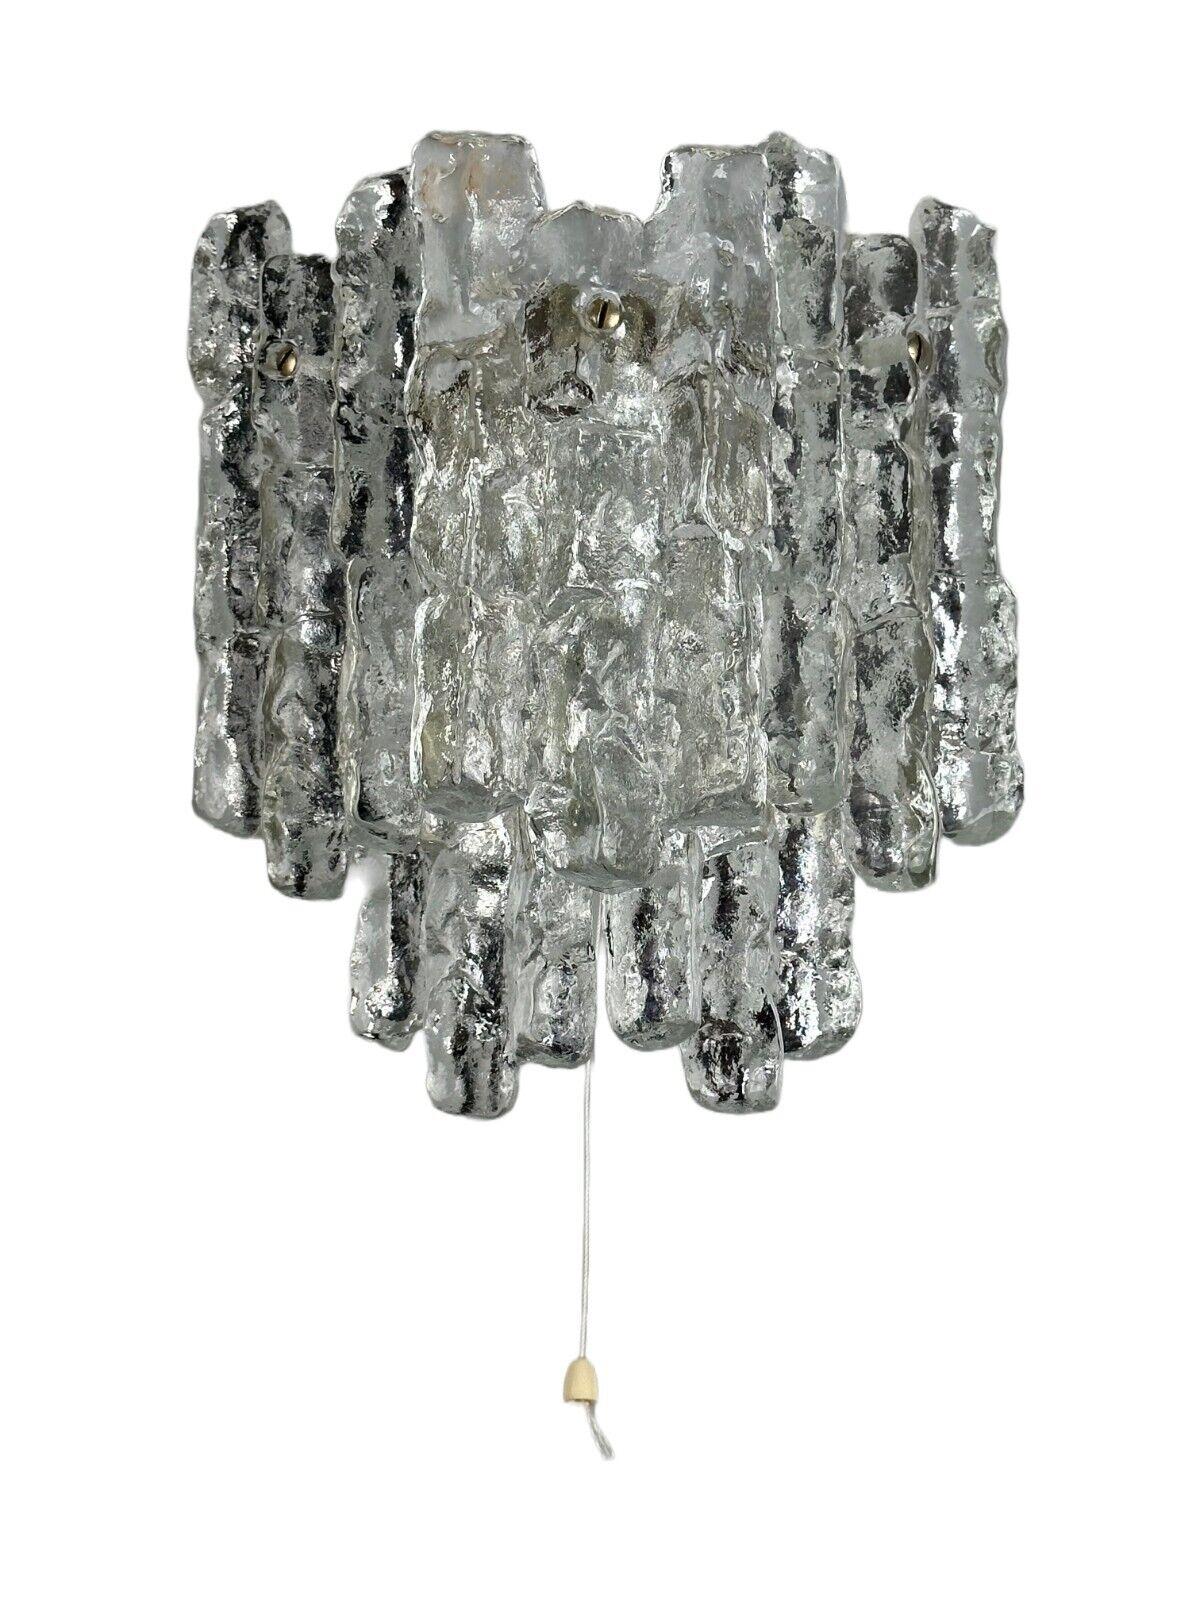 60s 70s wall lamp J.T. Kalmar Austria Ice Glass Wall Sconce Space Age

Object: wall lamp

Manufacturer: J.T. Squid

Condition: good

Age: around 1960-1970

Dimensions:

Width = 22cm
Height = 25cm
Depth = 13.5cm

Material: metal, glass

Other